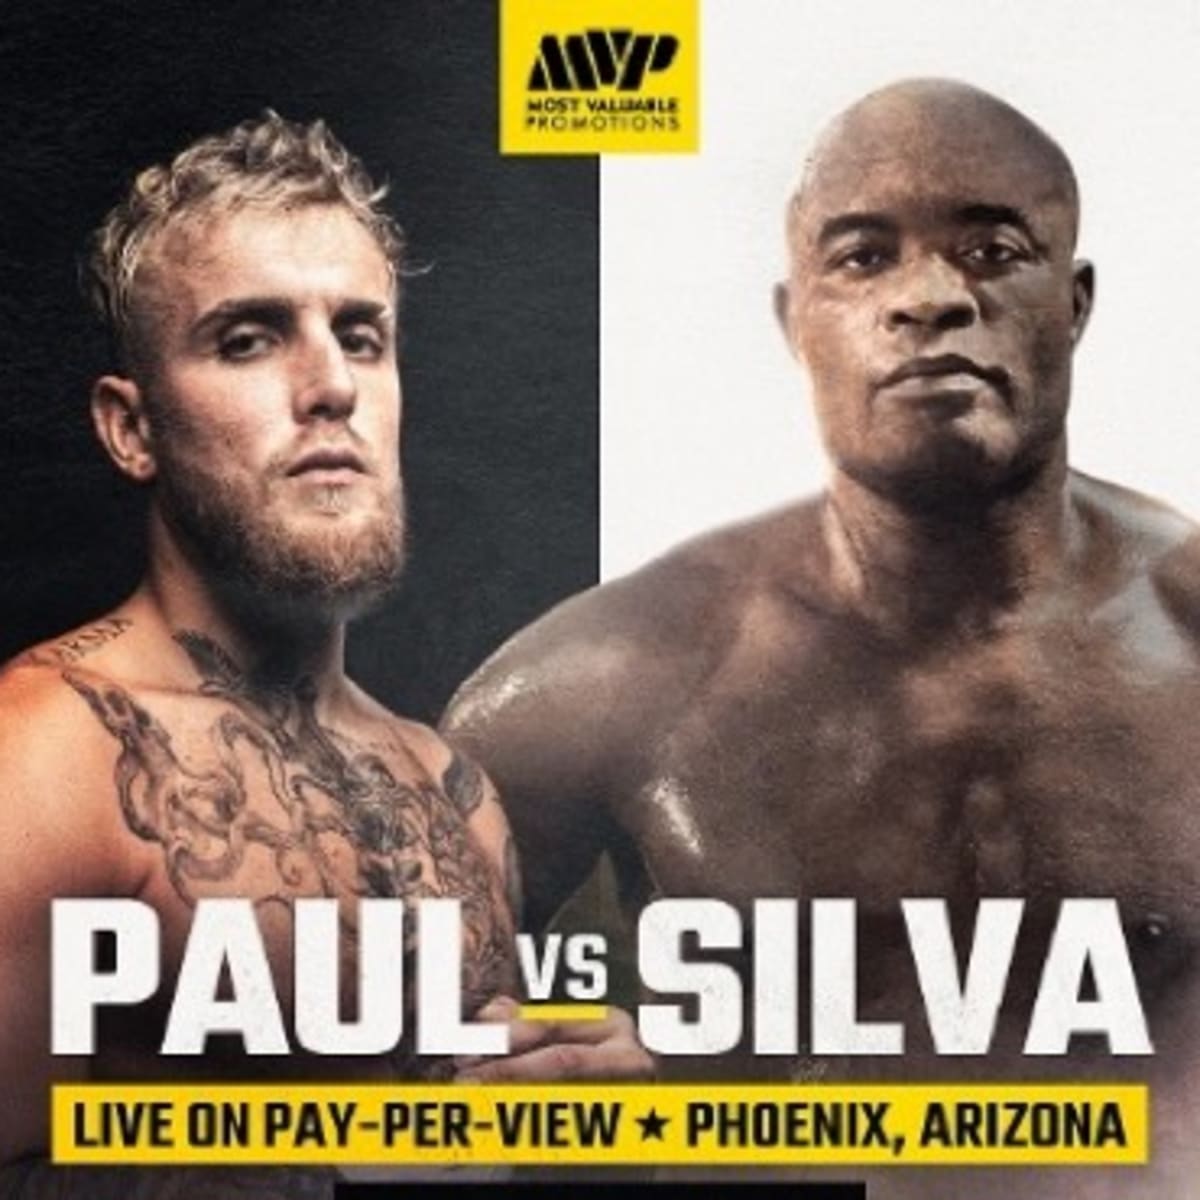 Jake Paul vs. Anderson Silva date, start time, odds, tickets & card for  2022 boxing fight